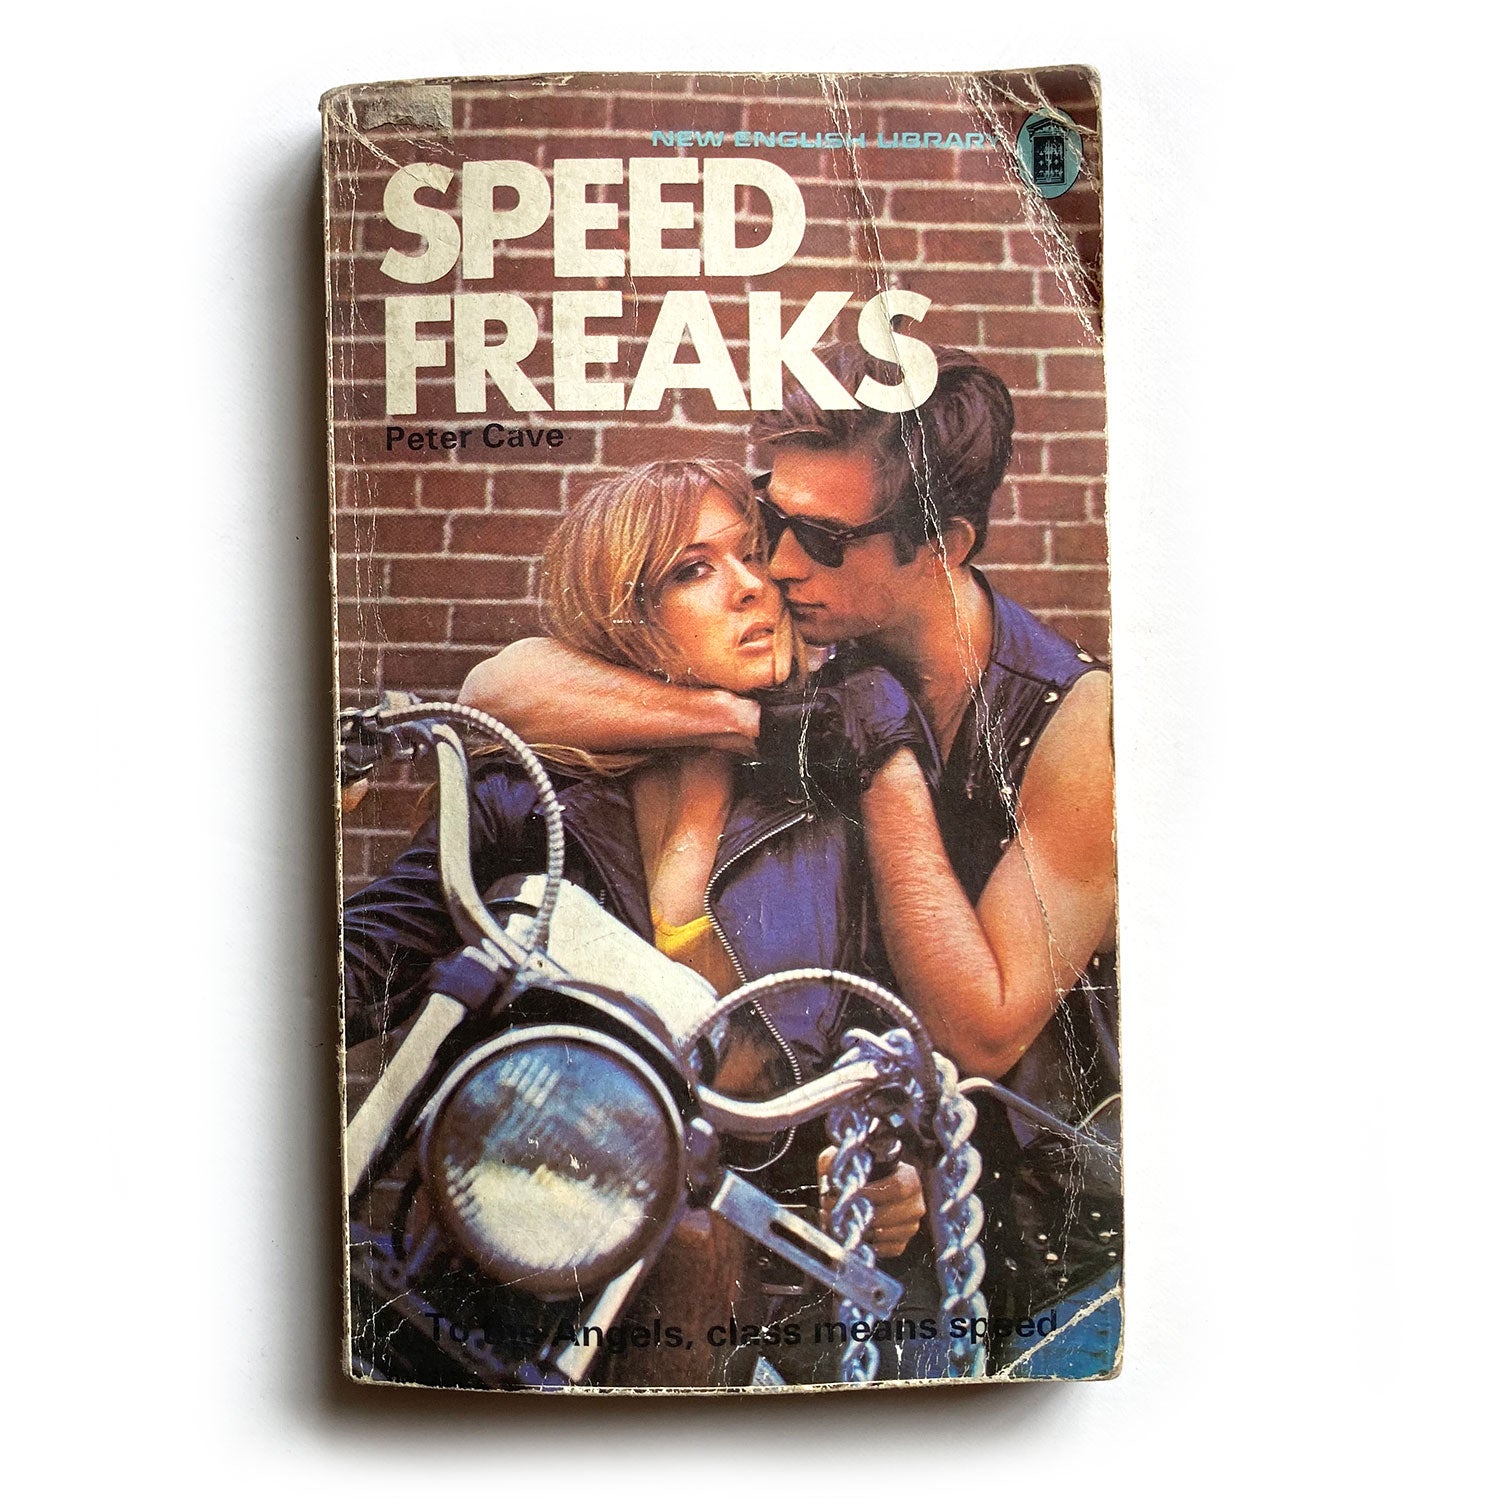 Speed Freaks by Peter Cave, first edition New English Library paperback, 1973